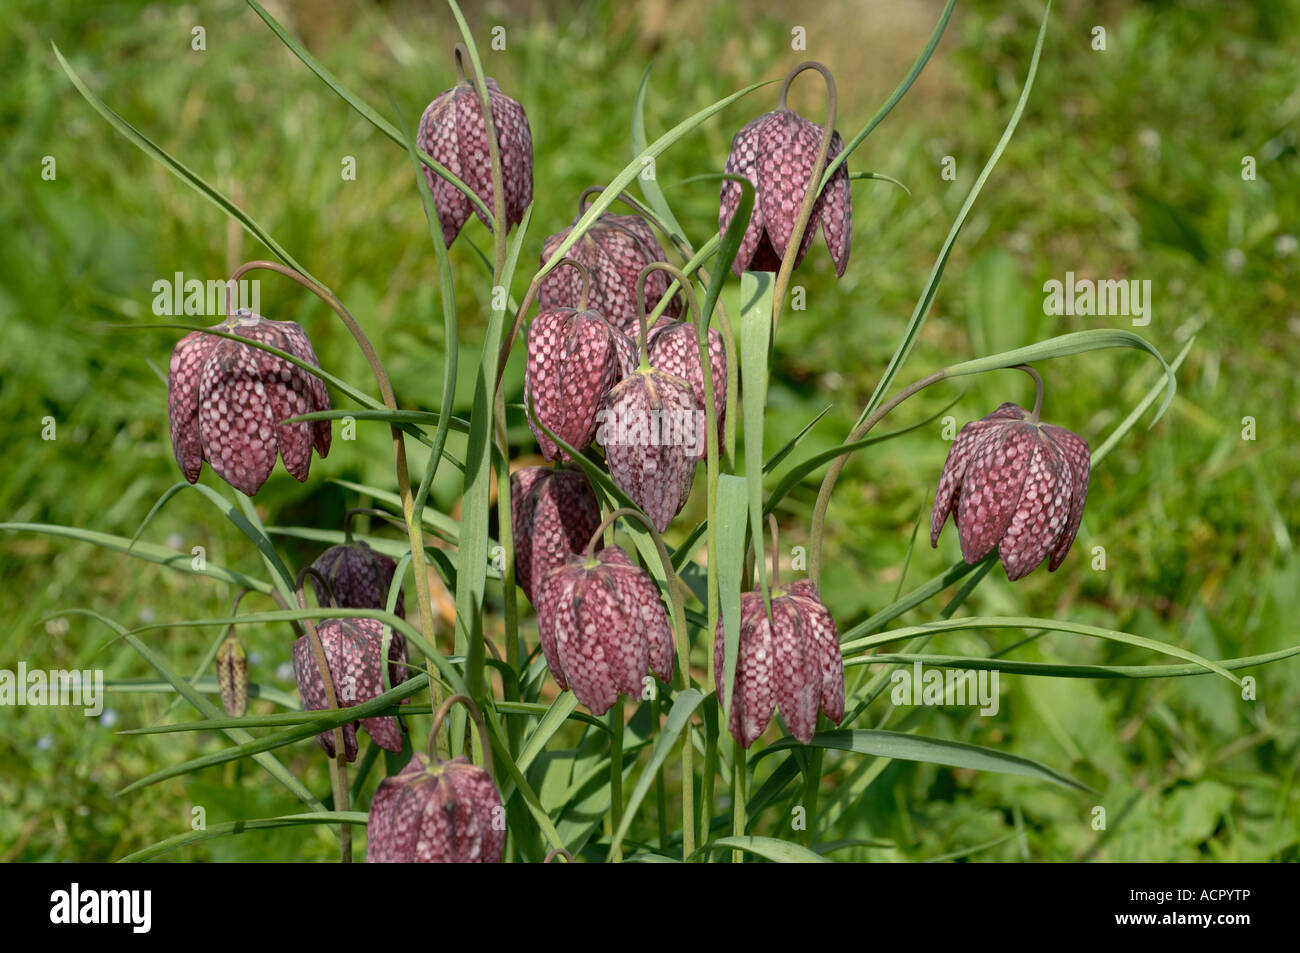 Snake s head fritillary Fritillaria meleagris flowering in a small group Stock Photo